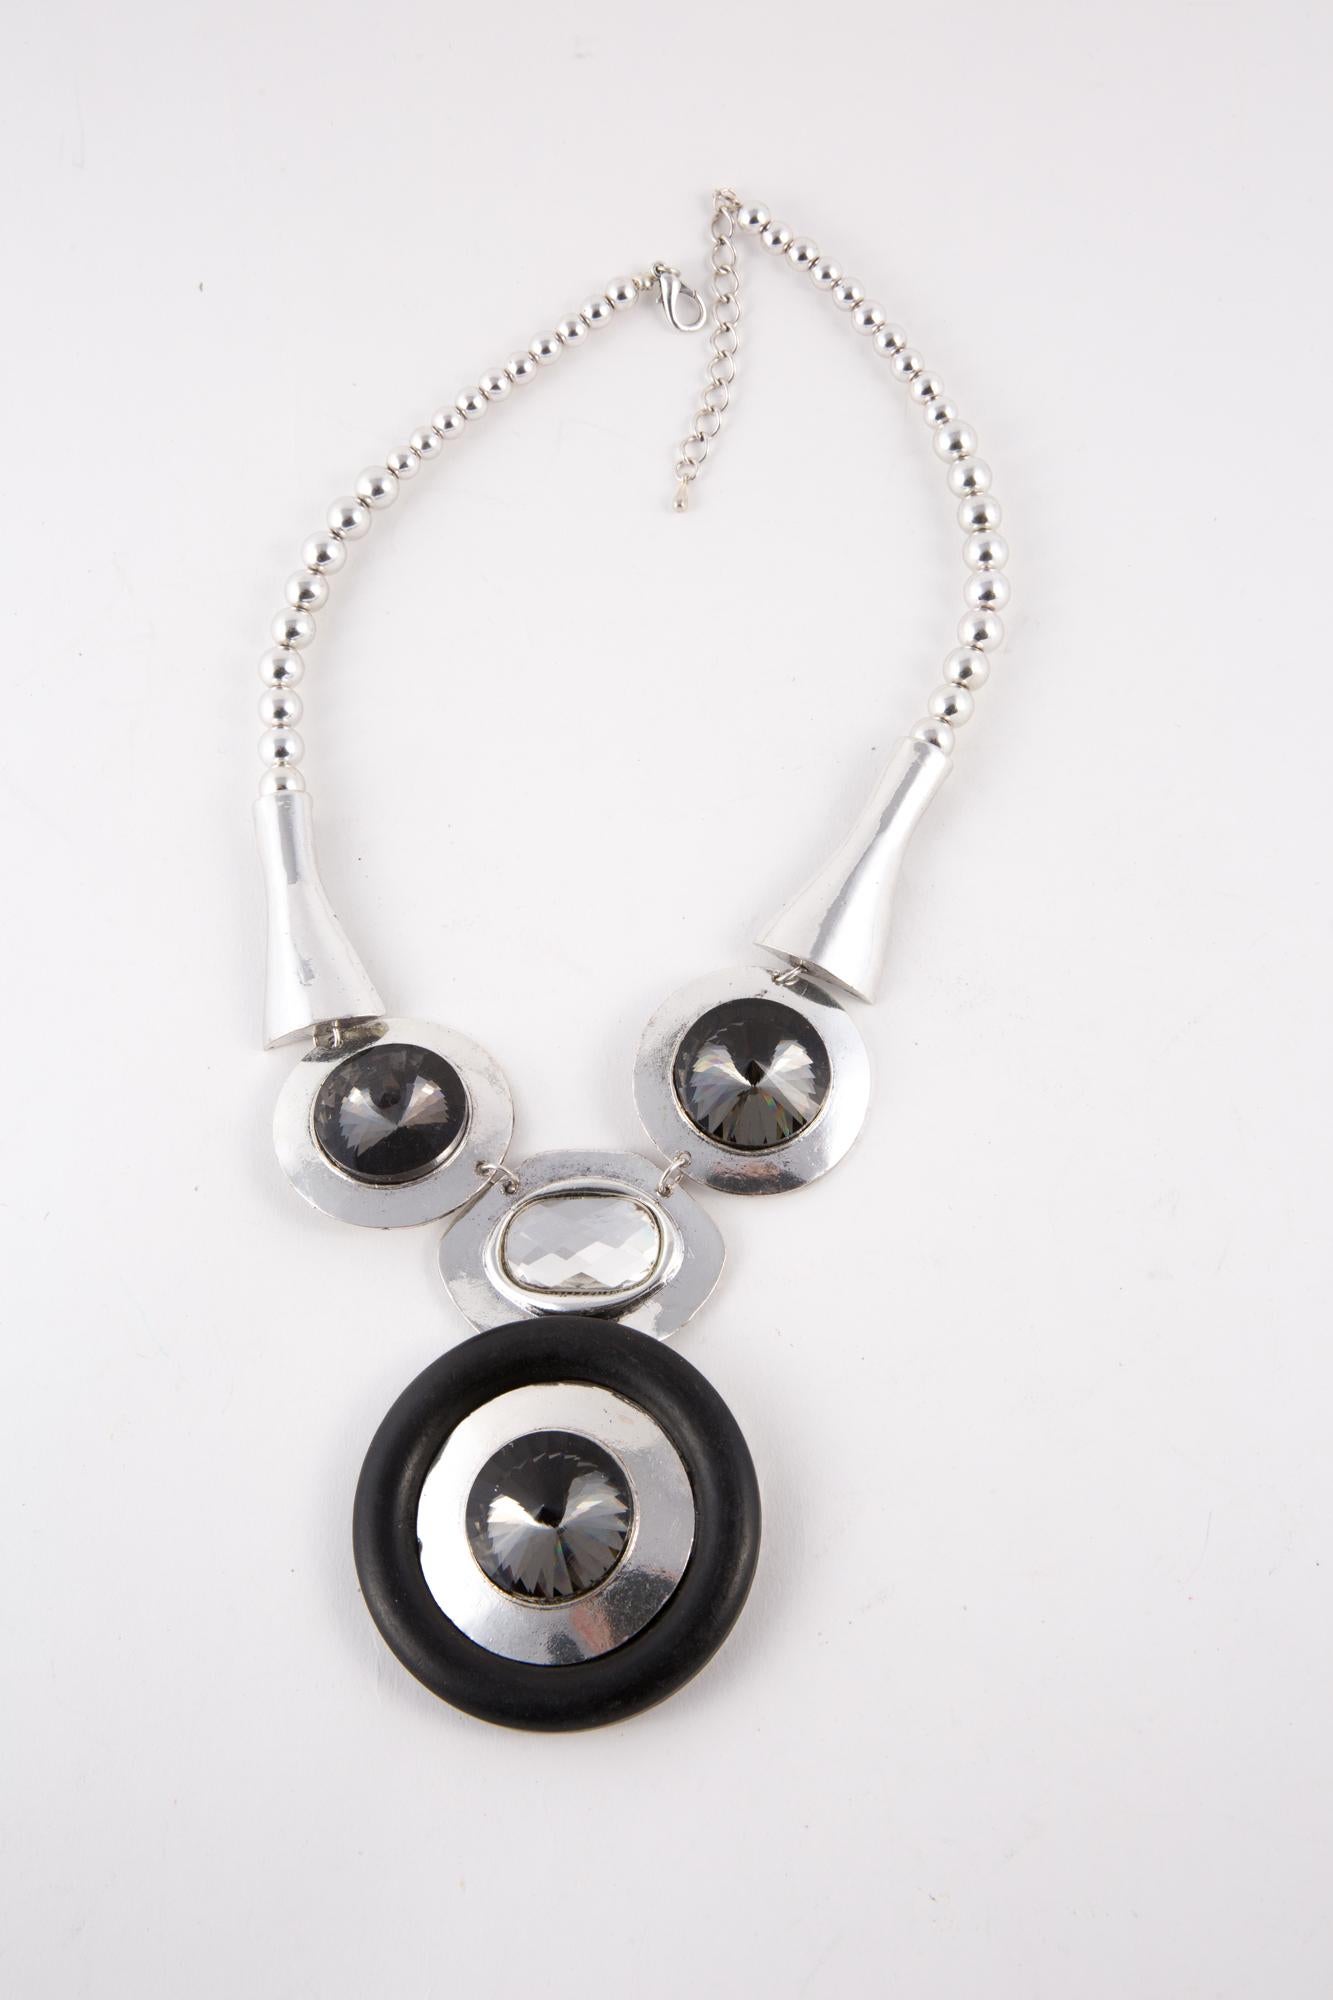  1960s large decorative necklace featuring round black wood medal, black glass beads, silver-tone chain, an adjustable length, a spring-ring fastening.
Maxi length inside : 21.25in. (54cm)
Center Medal Diameter: 3.1in. (8cm)
In good vintage